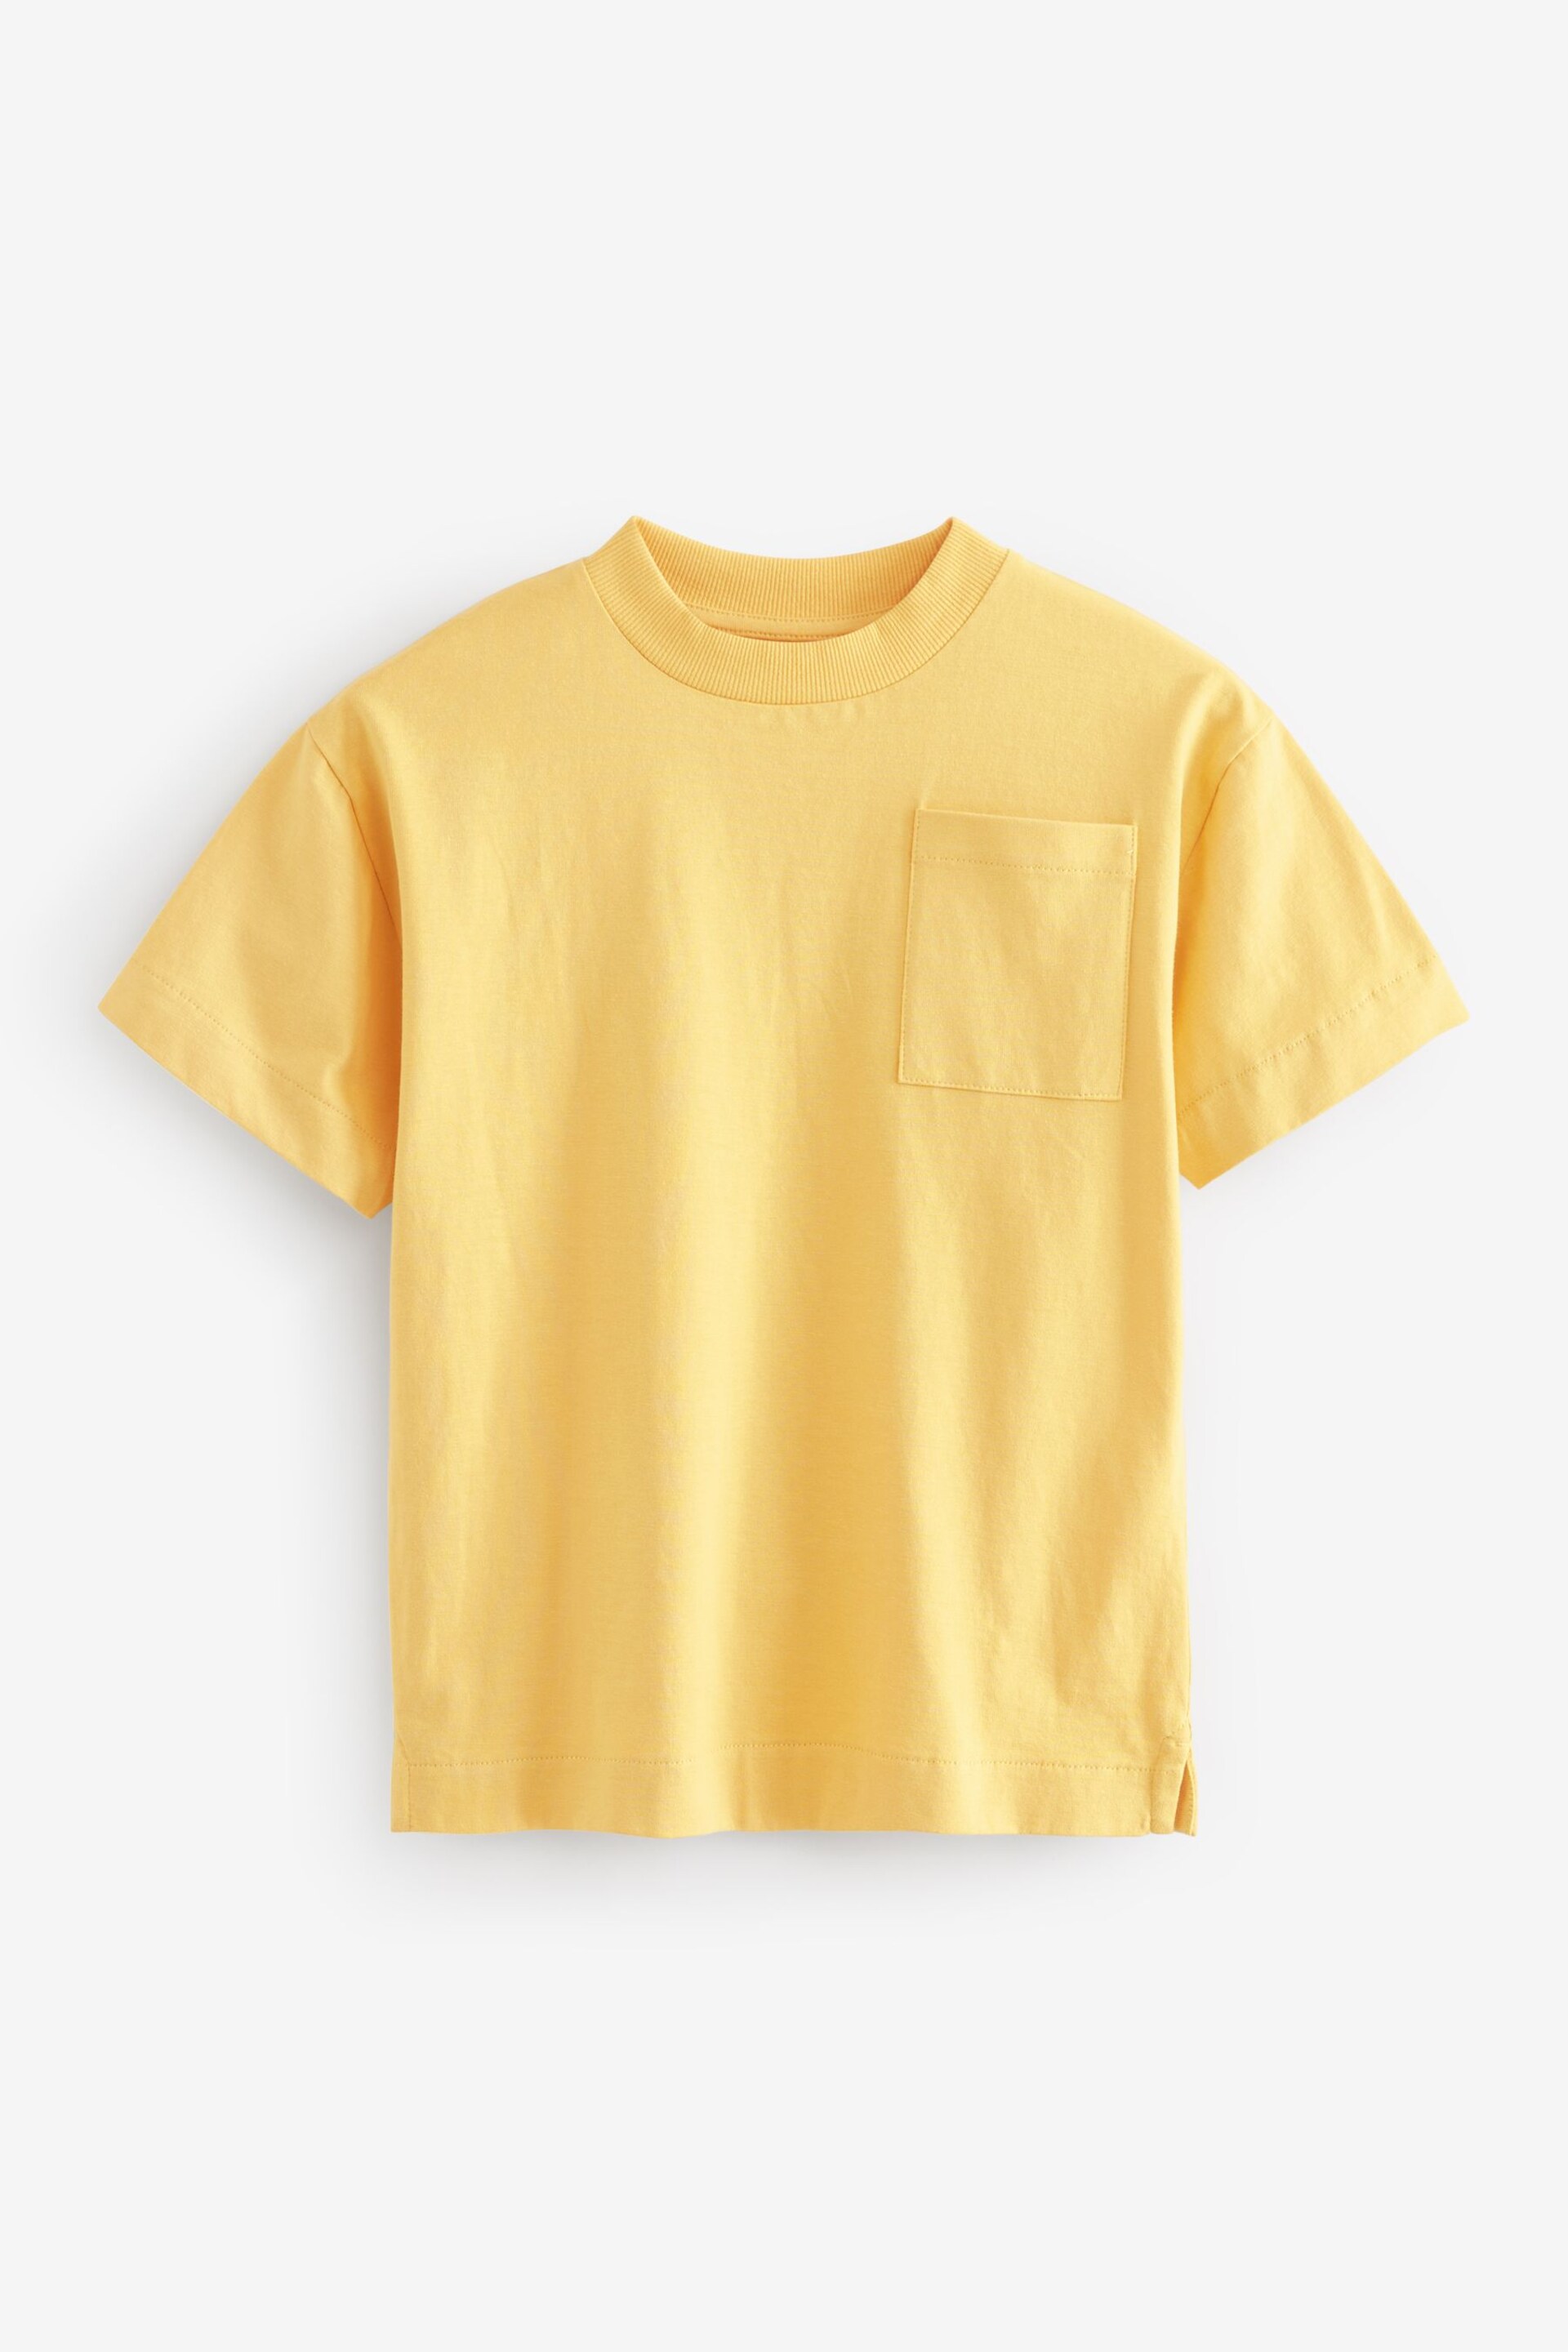 Blue/Yellow Relaxed Fit T-Shirt 3 Pack (3-16yrs) - Image 4 of 6